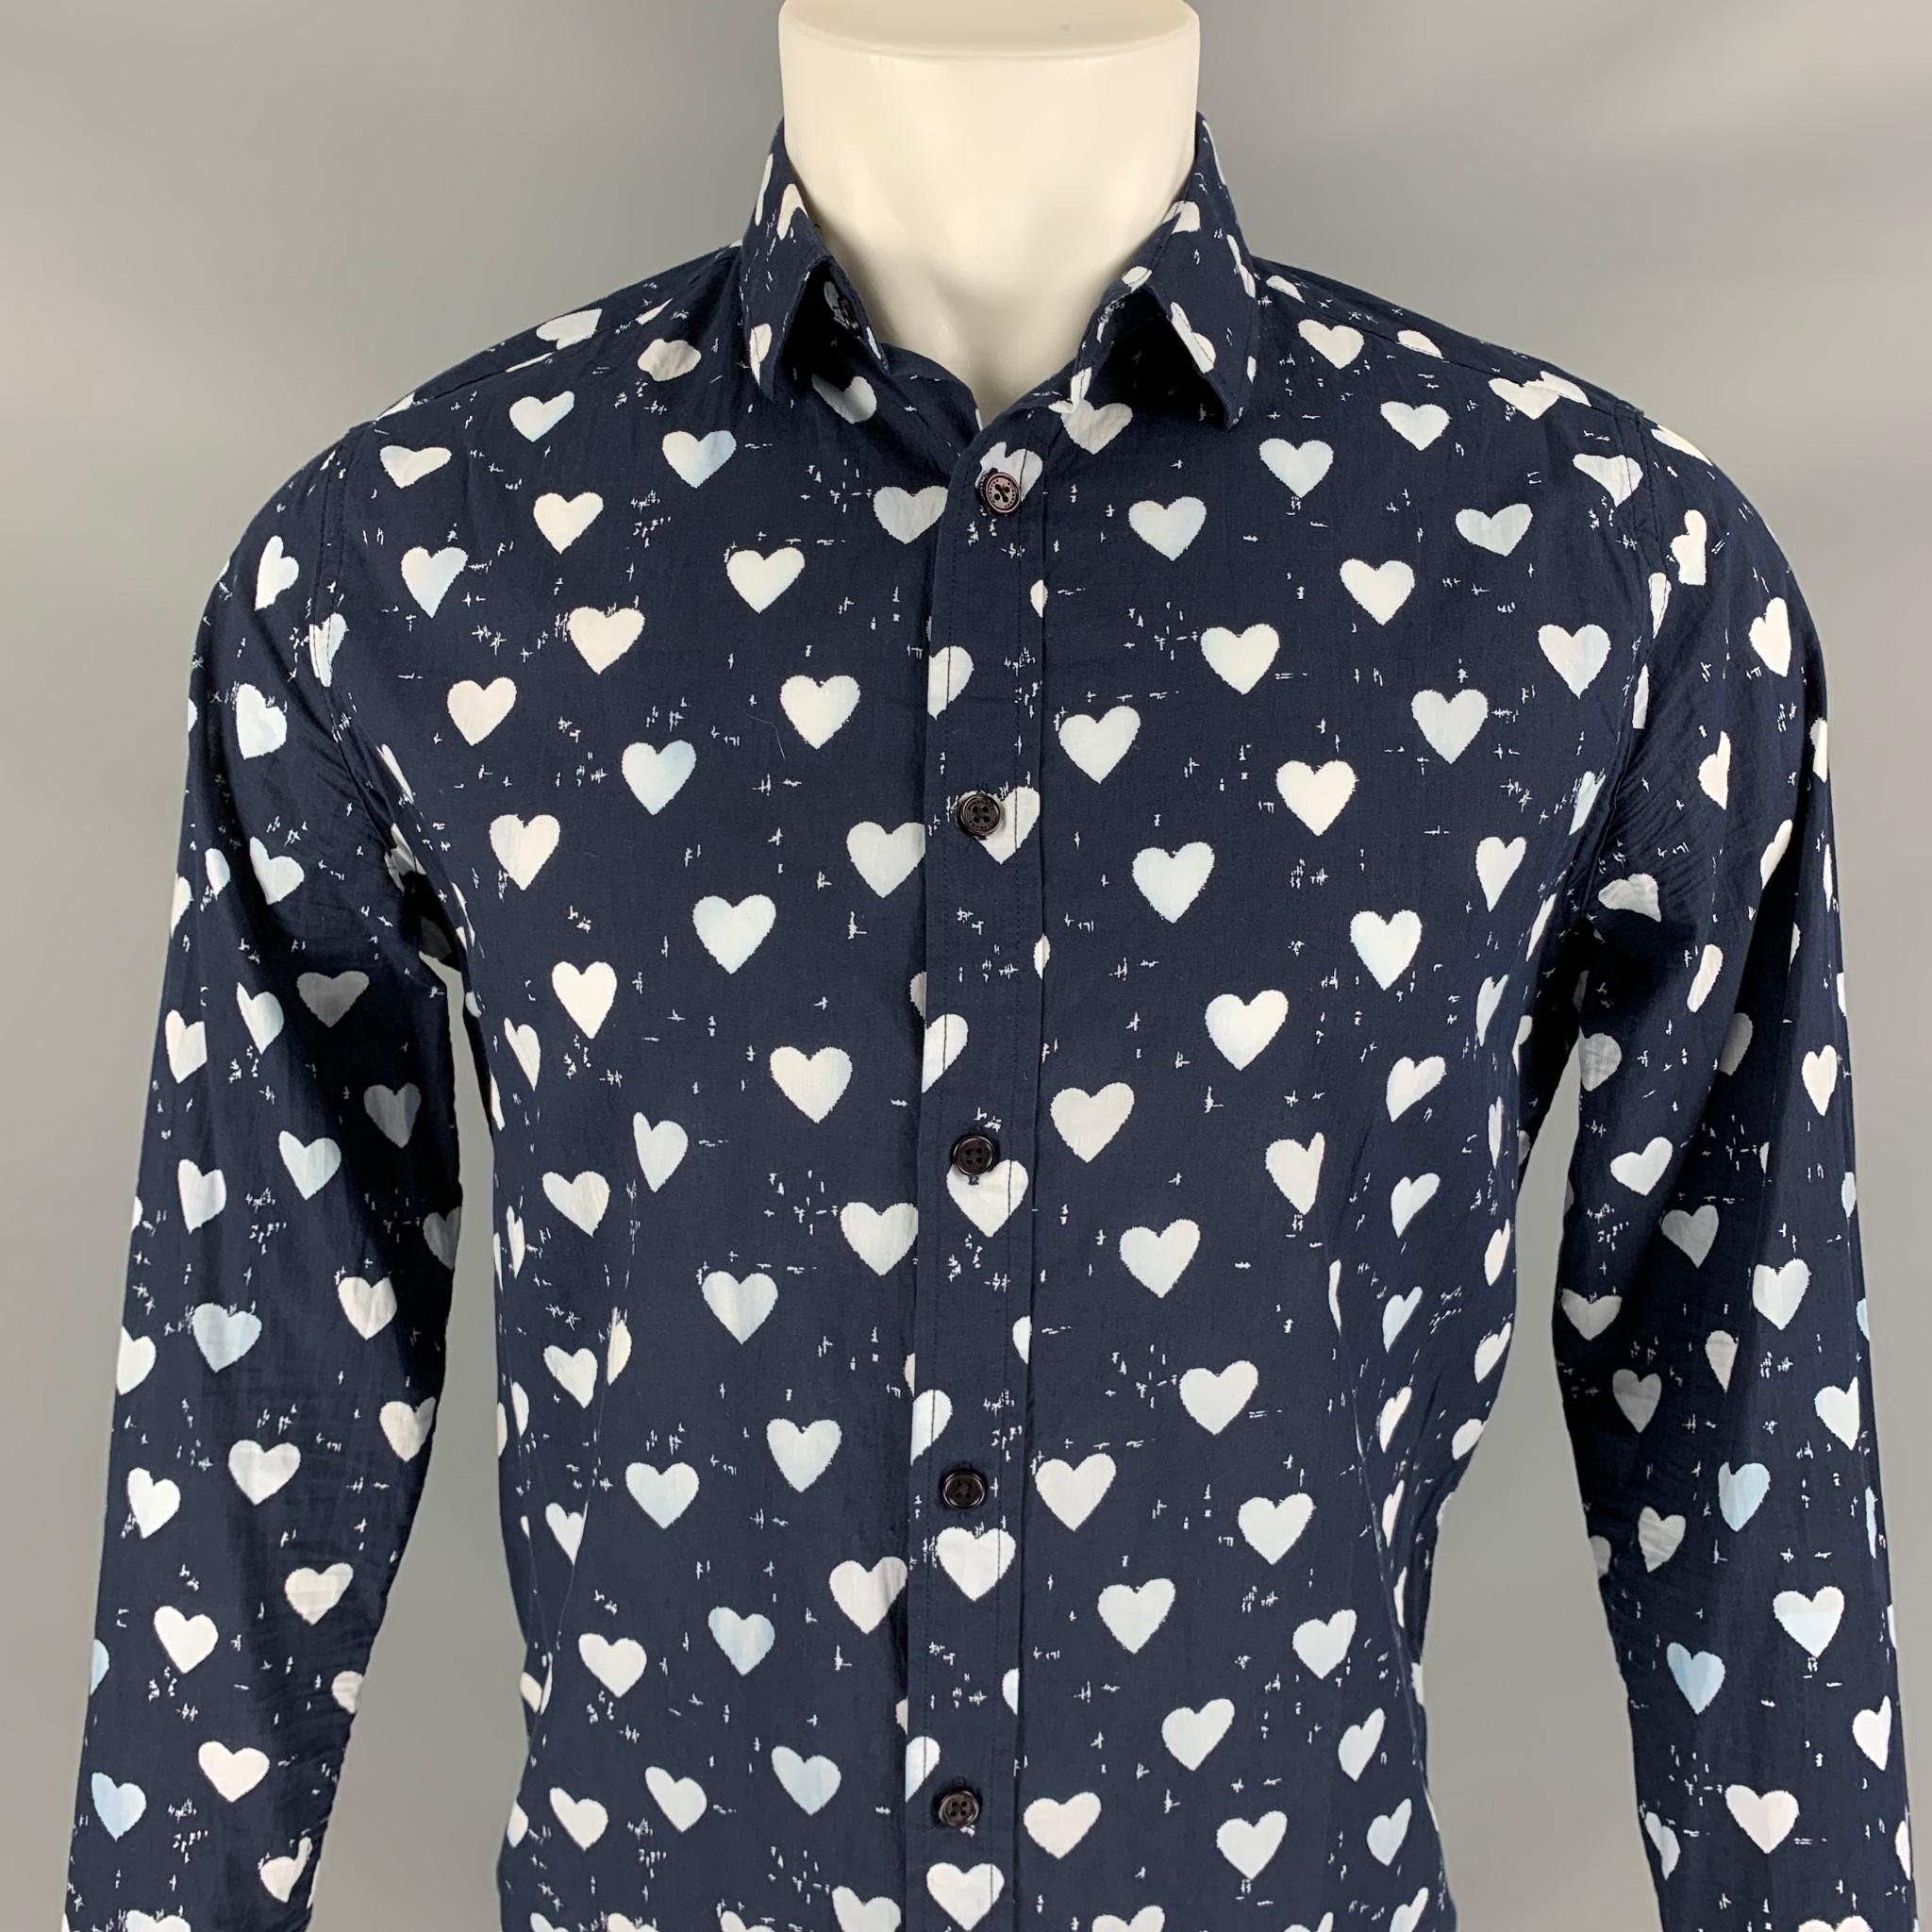 BURBERRY PRORSUM Pre-Fall 2013 long sleeve shirt comes in a navy & white heart print material featuring a spread collar and a button up closure. 

Very Good Pre-Owned Condition.
Marked: 46

Measurements:

Shoulder: 17 in.
Chest: 40 in.
Sleeve: 25